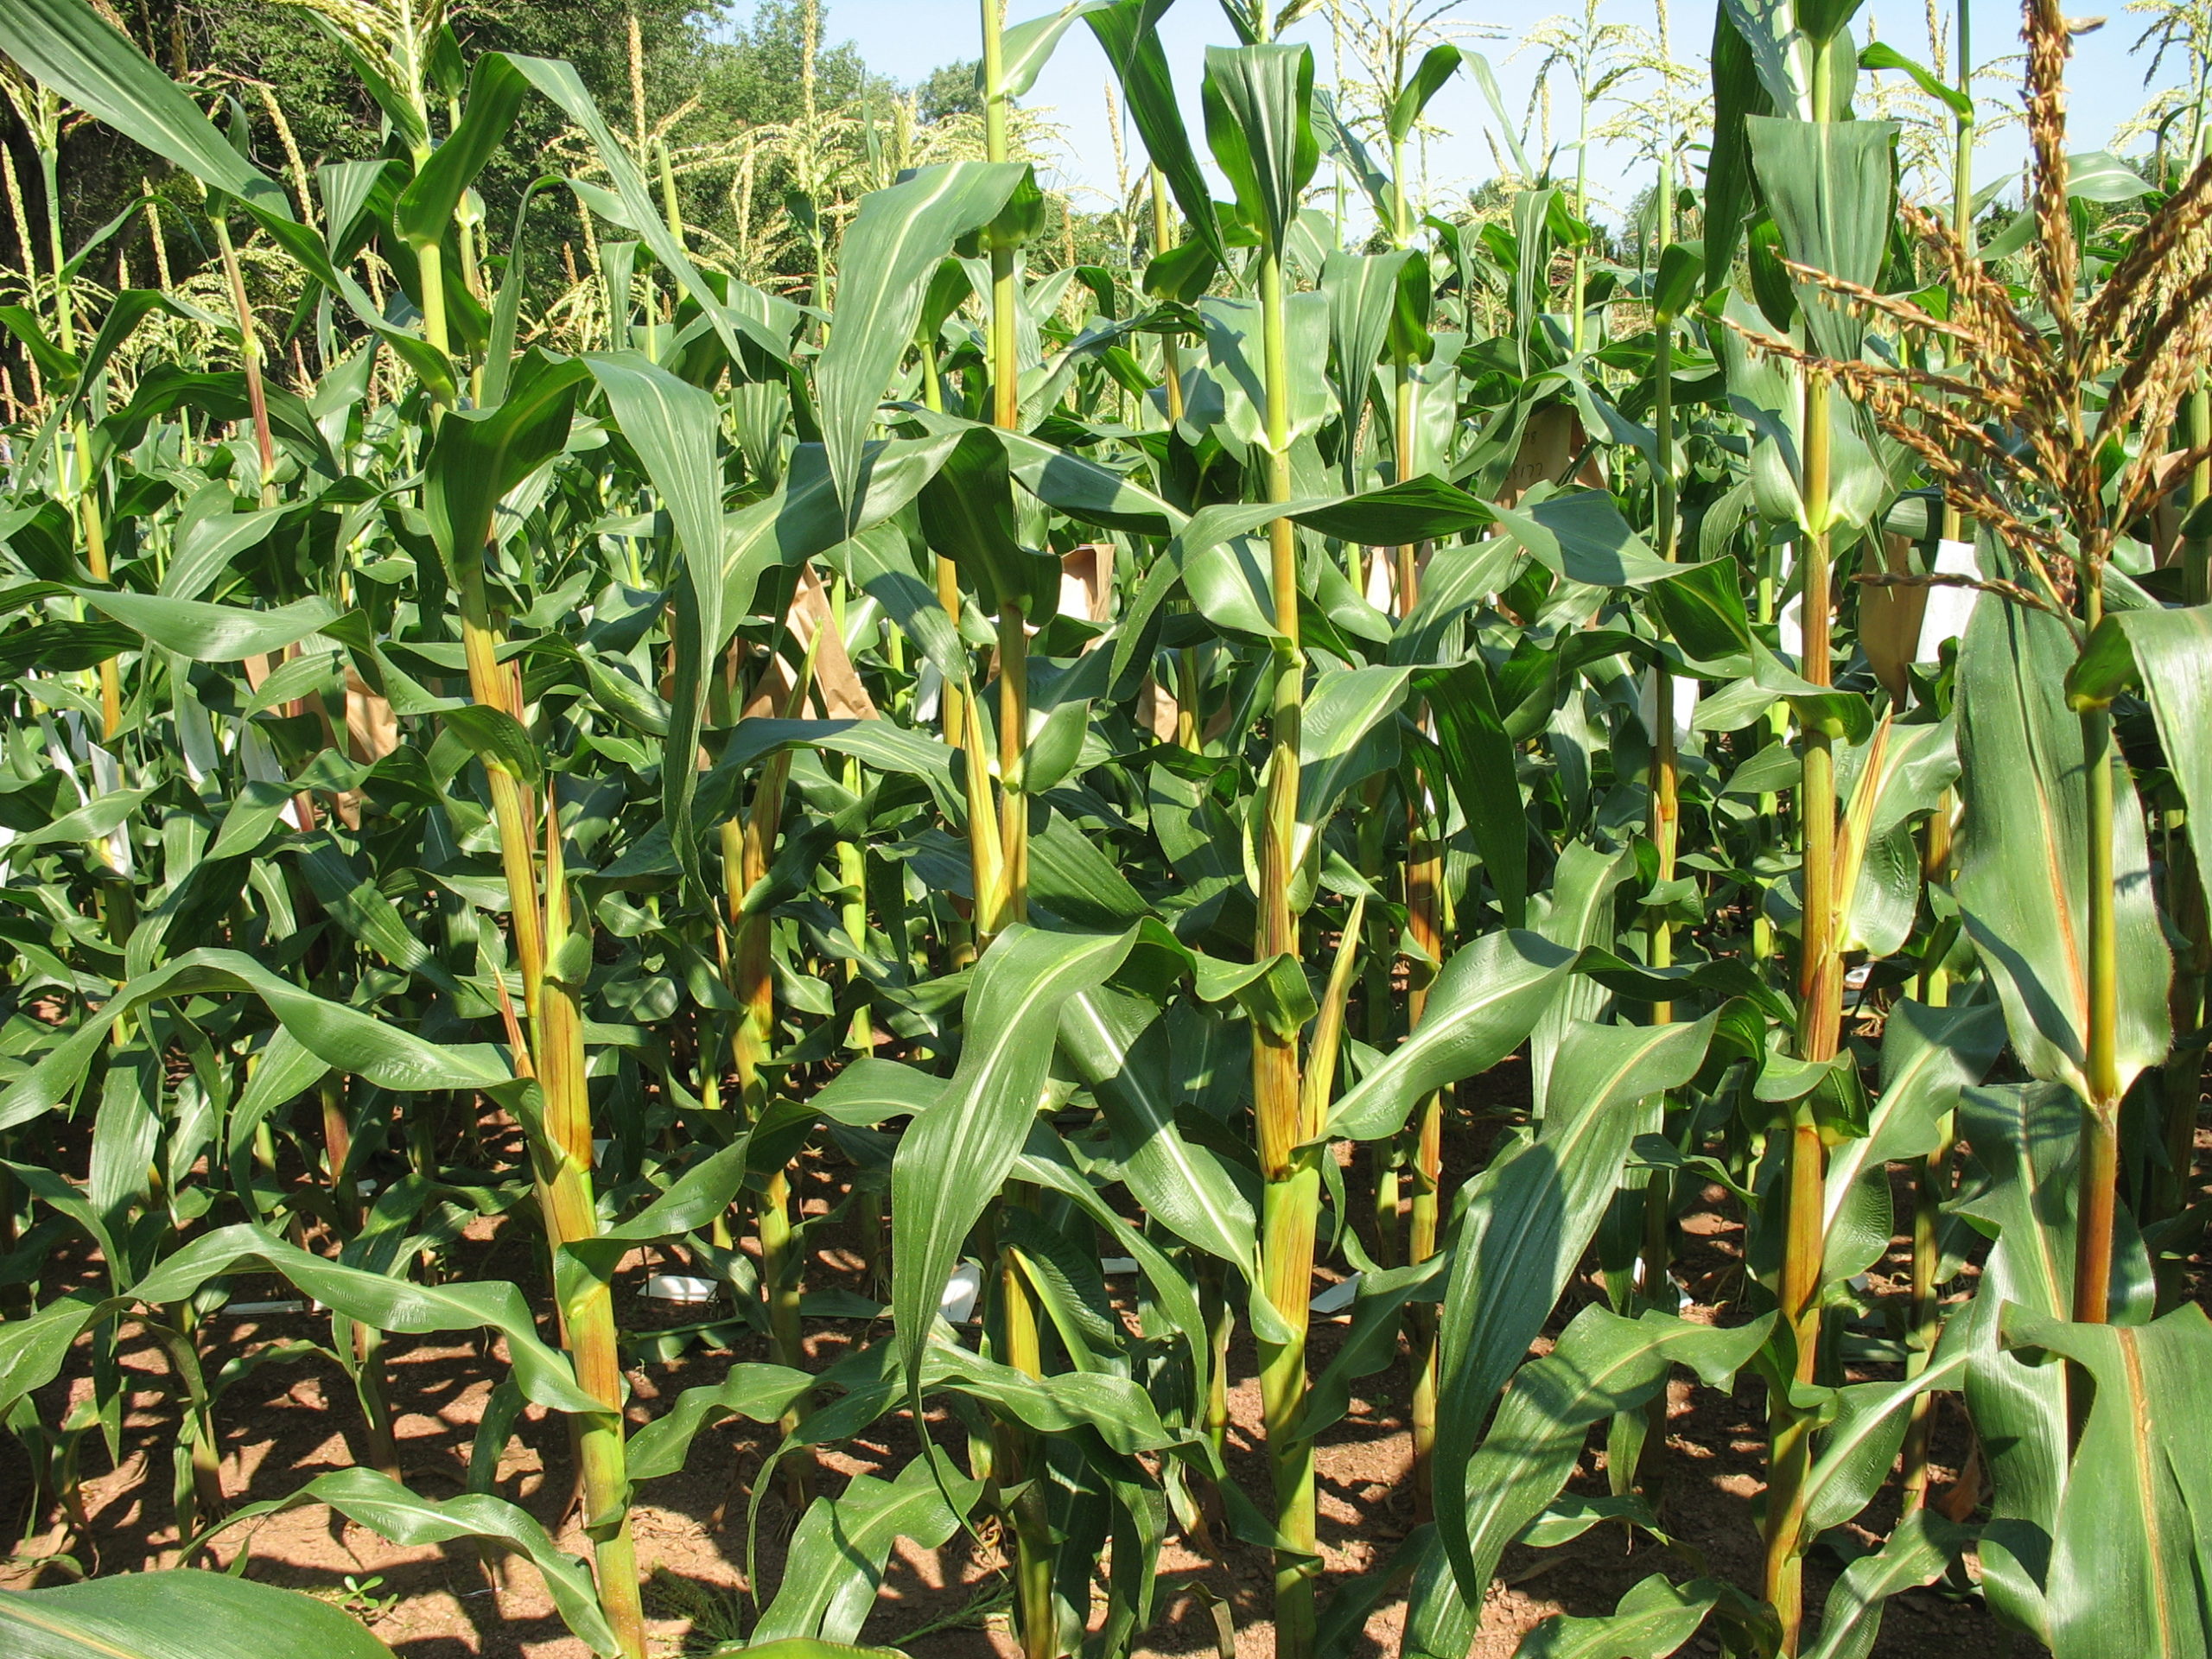 Pollen Genes Mutate Naturally in Only Some Strains of Corn